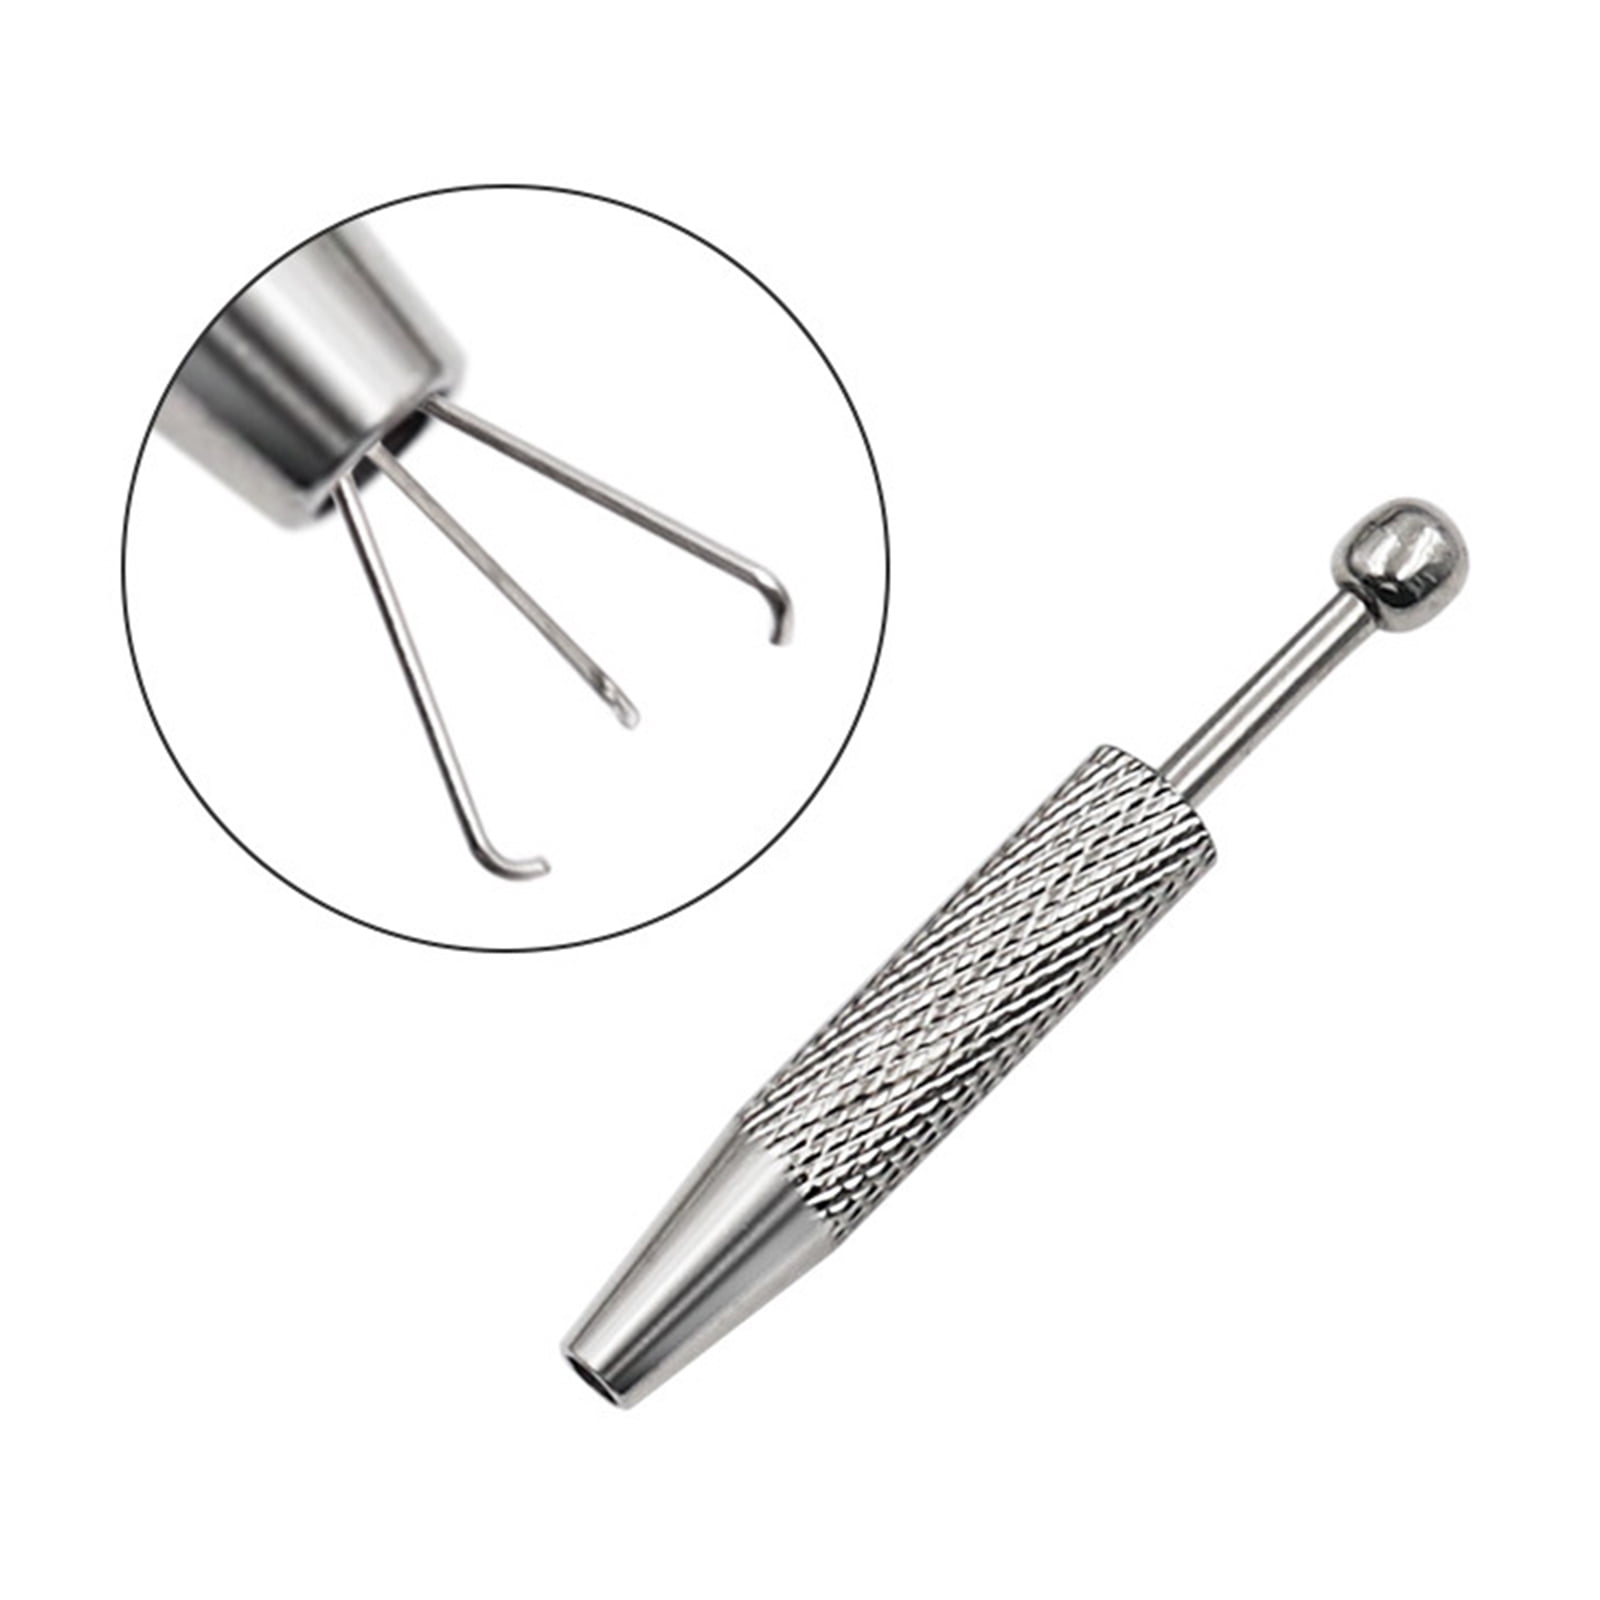  Bewudy 2Pcs Piercing Ball Grabber Tool, Stainless Steel  Jeweler's Pick Up Tool, 4 Prongs Holder Diamond Claw Grabber Pick Up Tool,  Tweezers Grabber For Tiny Objects IC Chip Electronic Components 